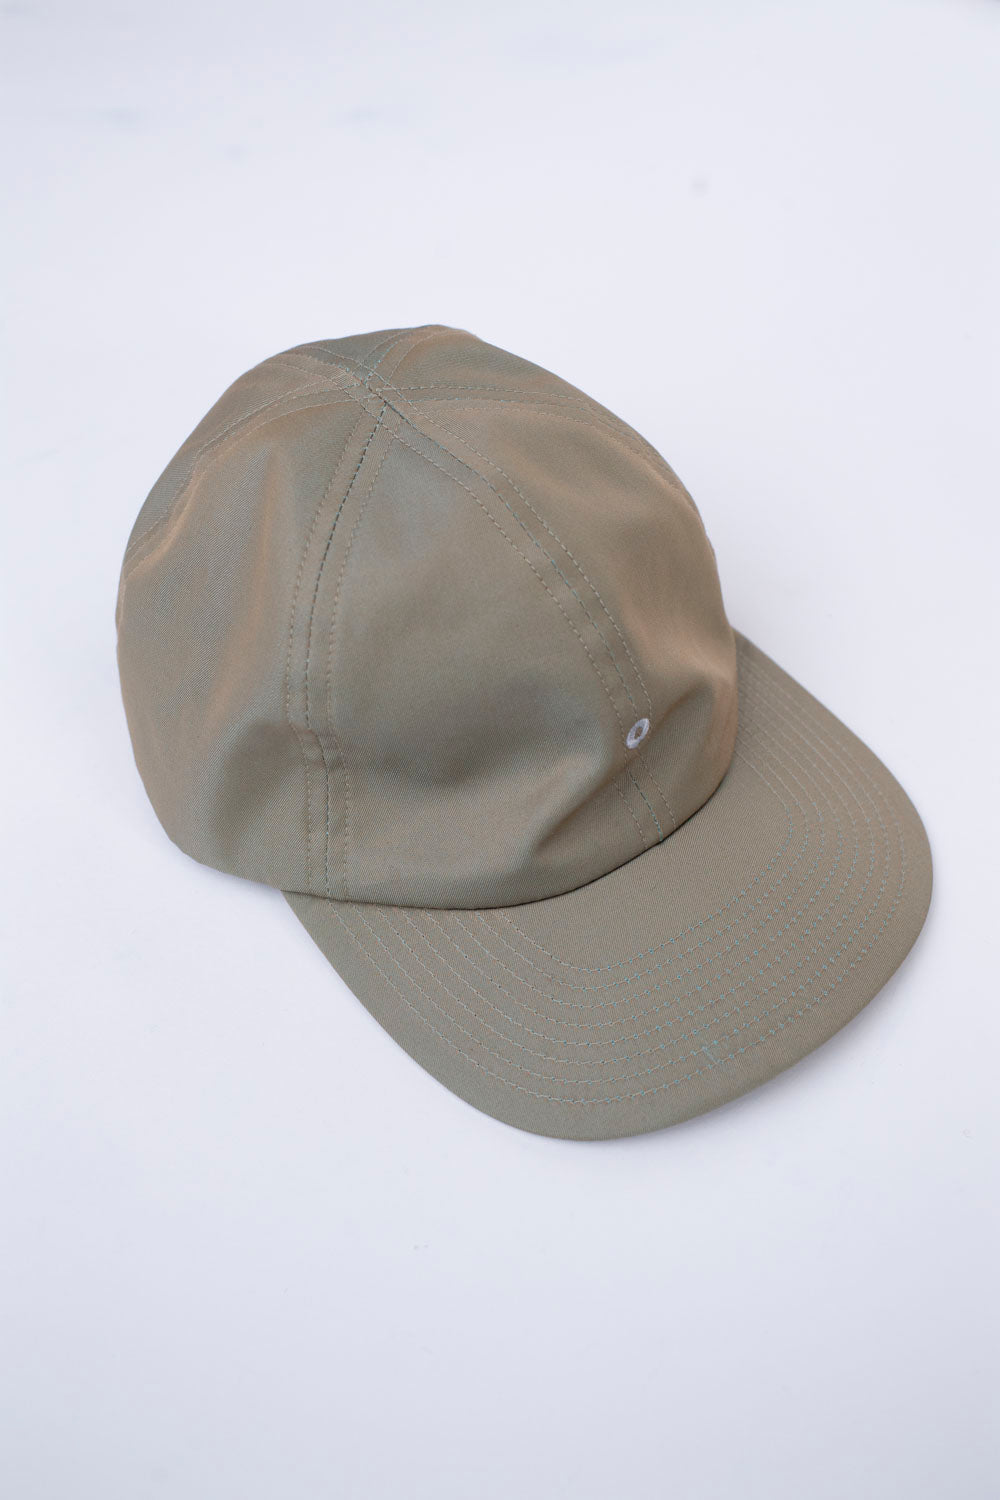 3903-FTO - Post Ball Cap French Twill - Olive